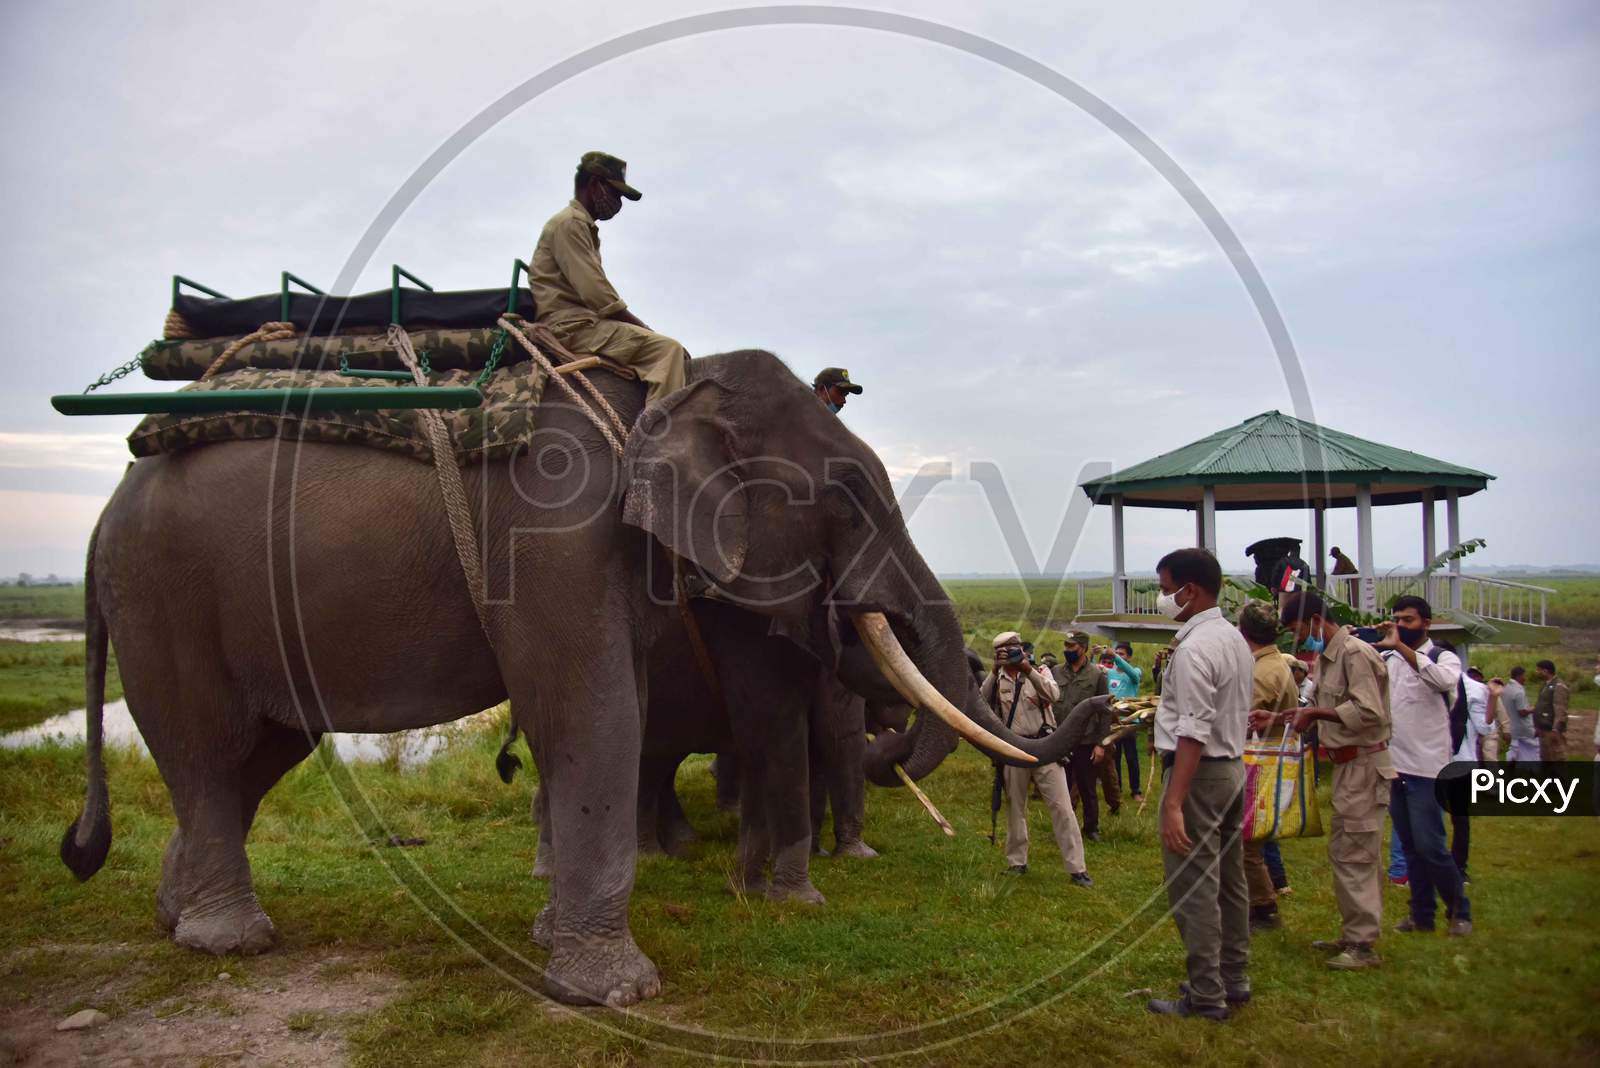 Elephants are lined up for tourists to ride after seven-month-long closure since March because of coronavirus lockdown  at the Kaziranga national park  in Golaghat District of Assam on Nov 1,2020